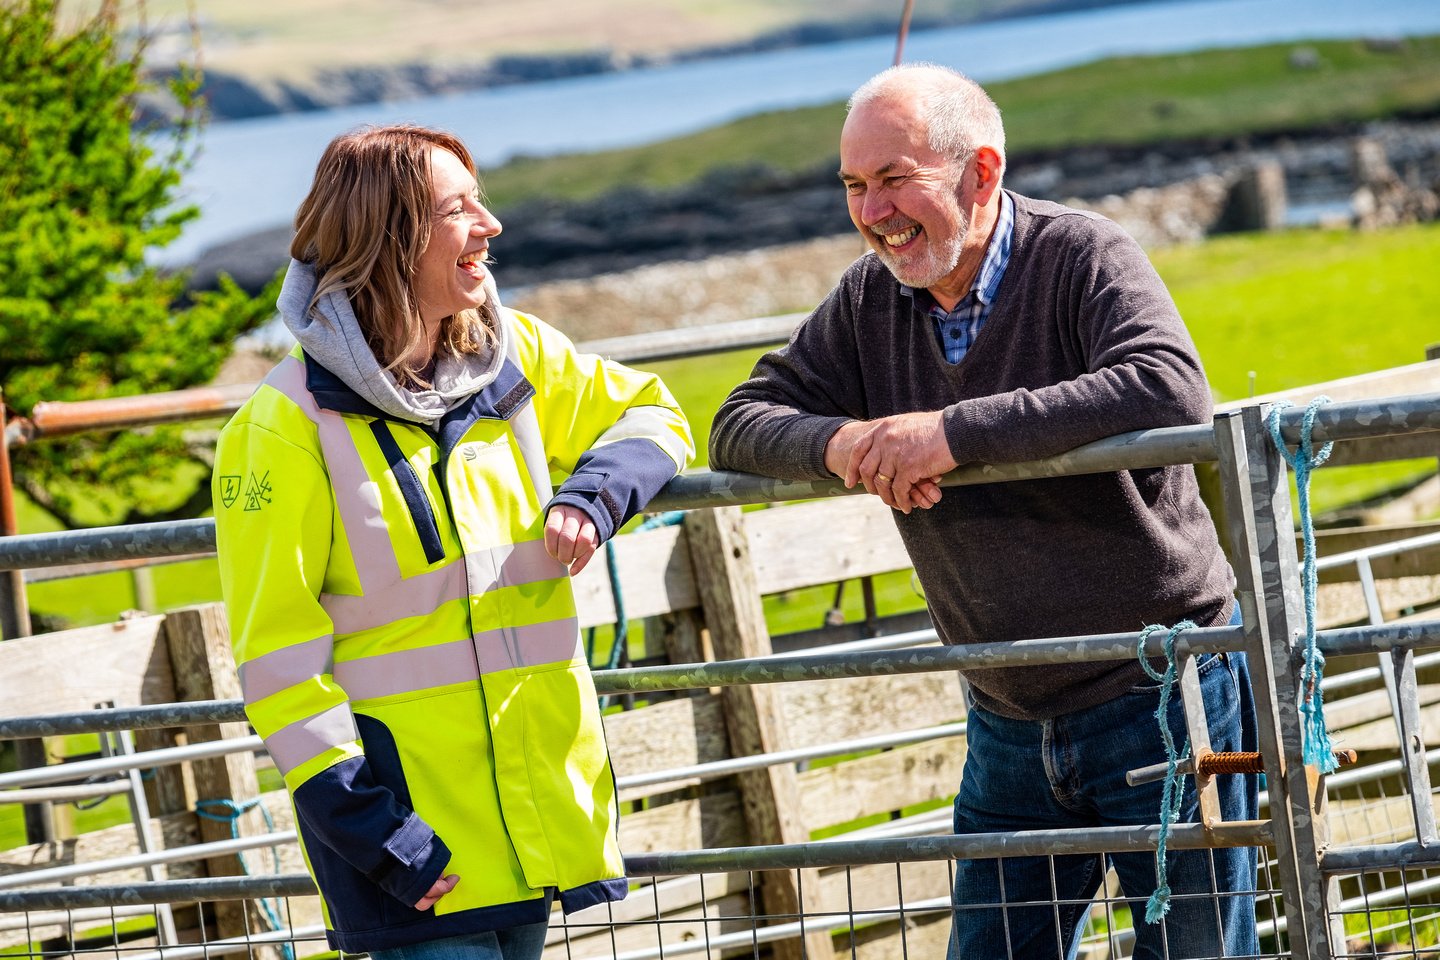 Sharon Powell, based in Shetland, is speaking with one of her stakeholders by a fence 